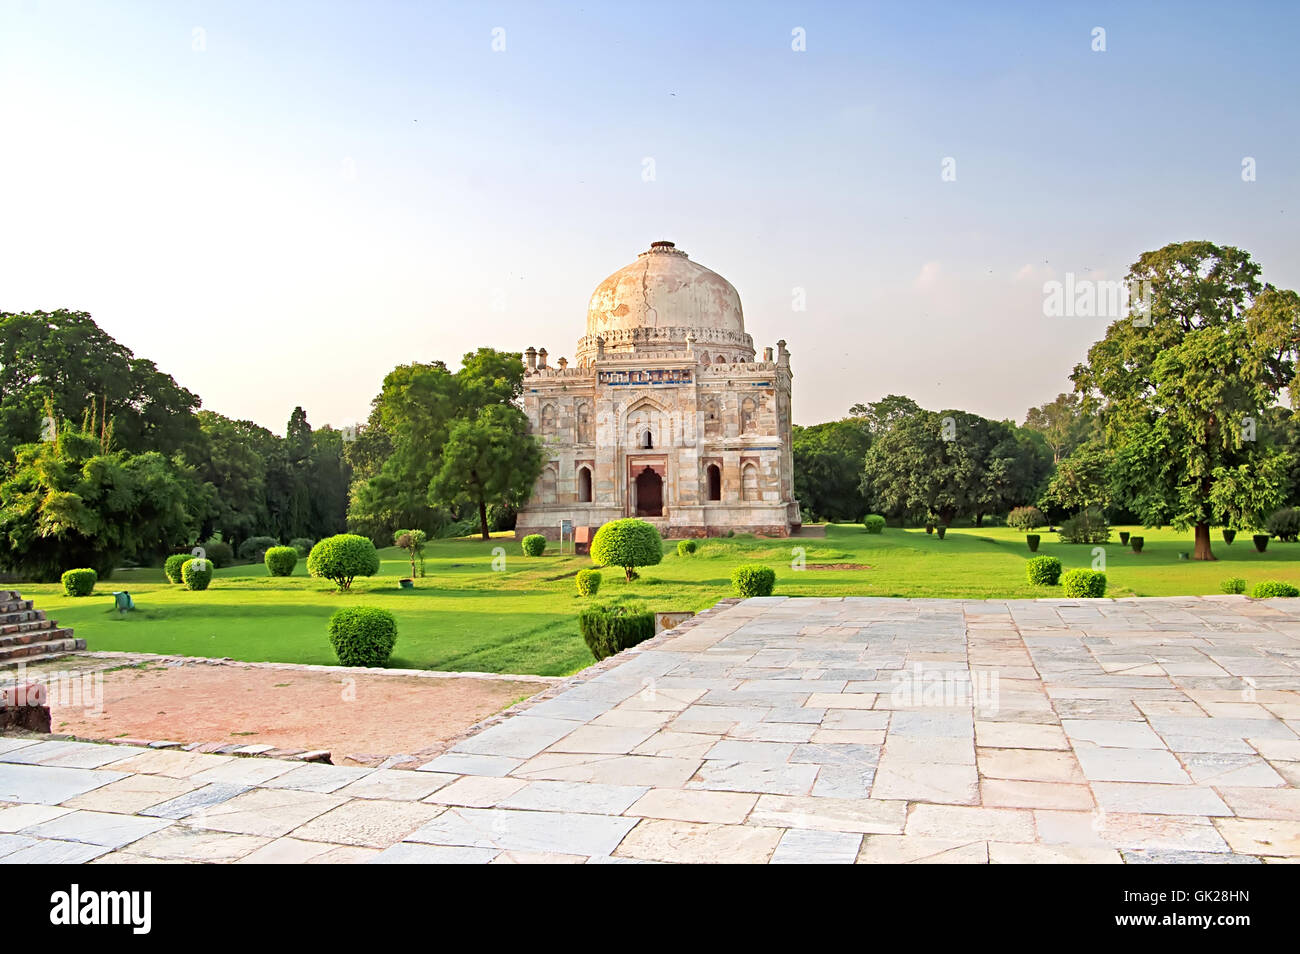 Lodi Gardens on the sunset. Islamic Tomb (Seesh Gumbad) set in landscaped gardens. 15th Century AD. New Delhi, India Stock Photo